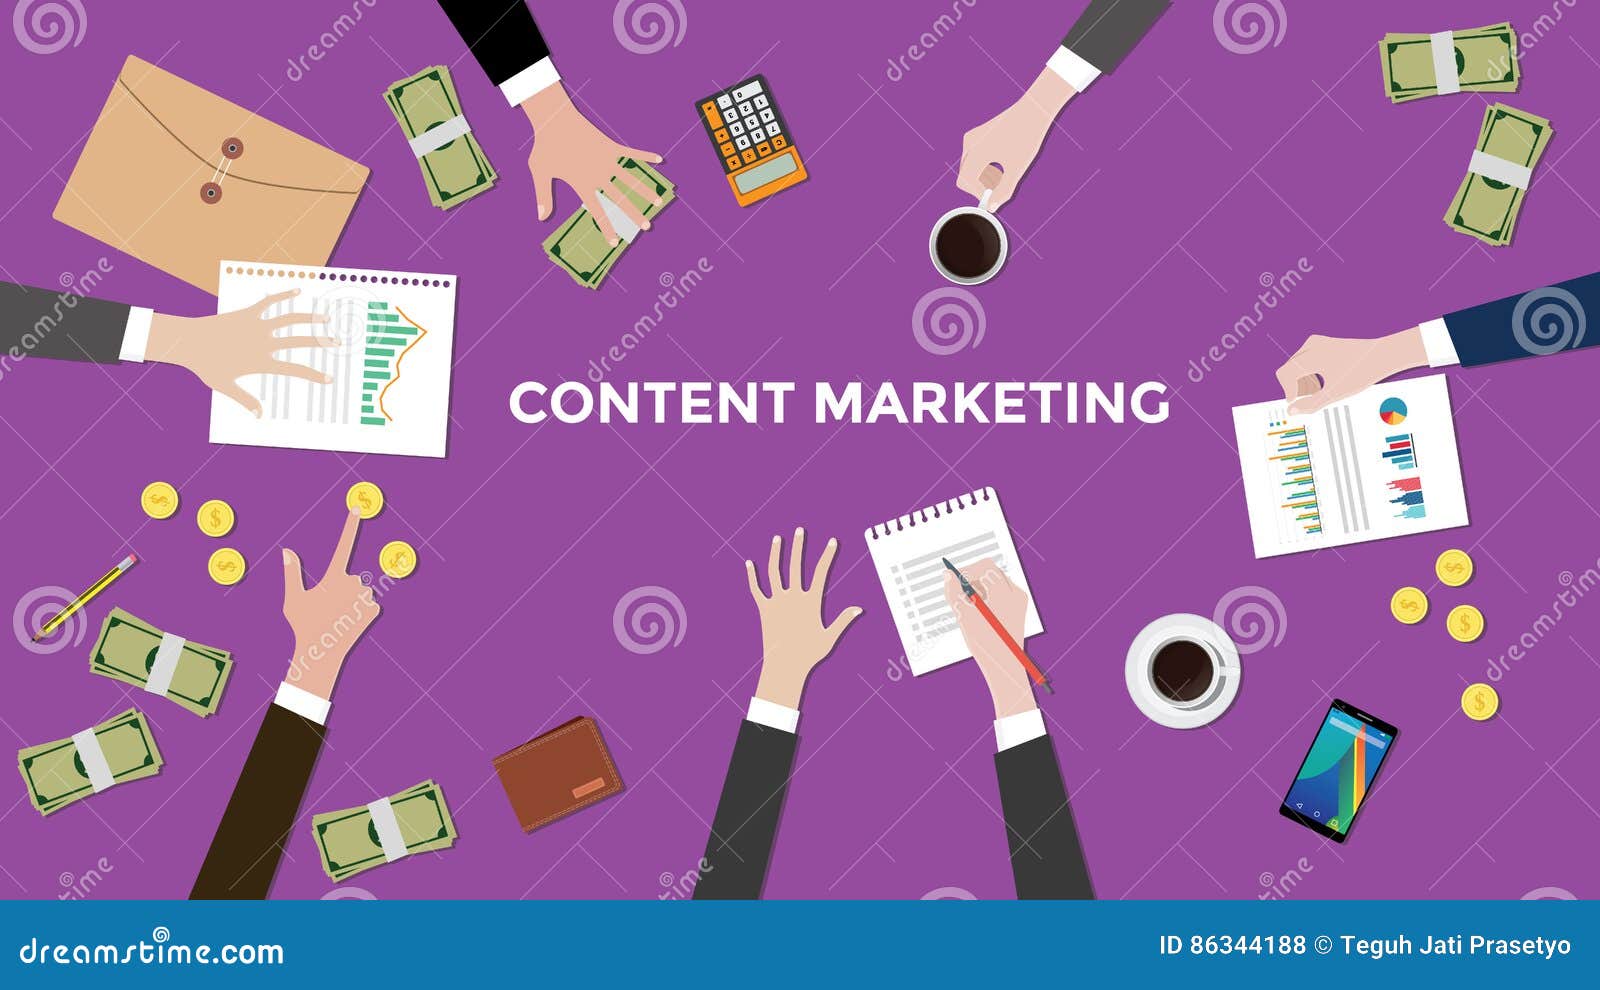 discuss content marketing concept in a meeting  with paperworks, folder document, money and coins on top of